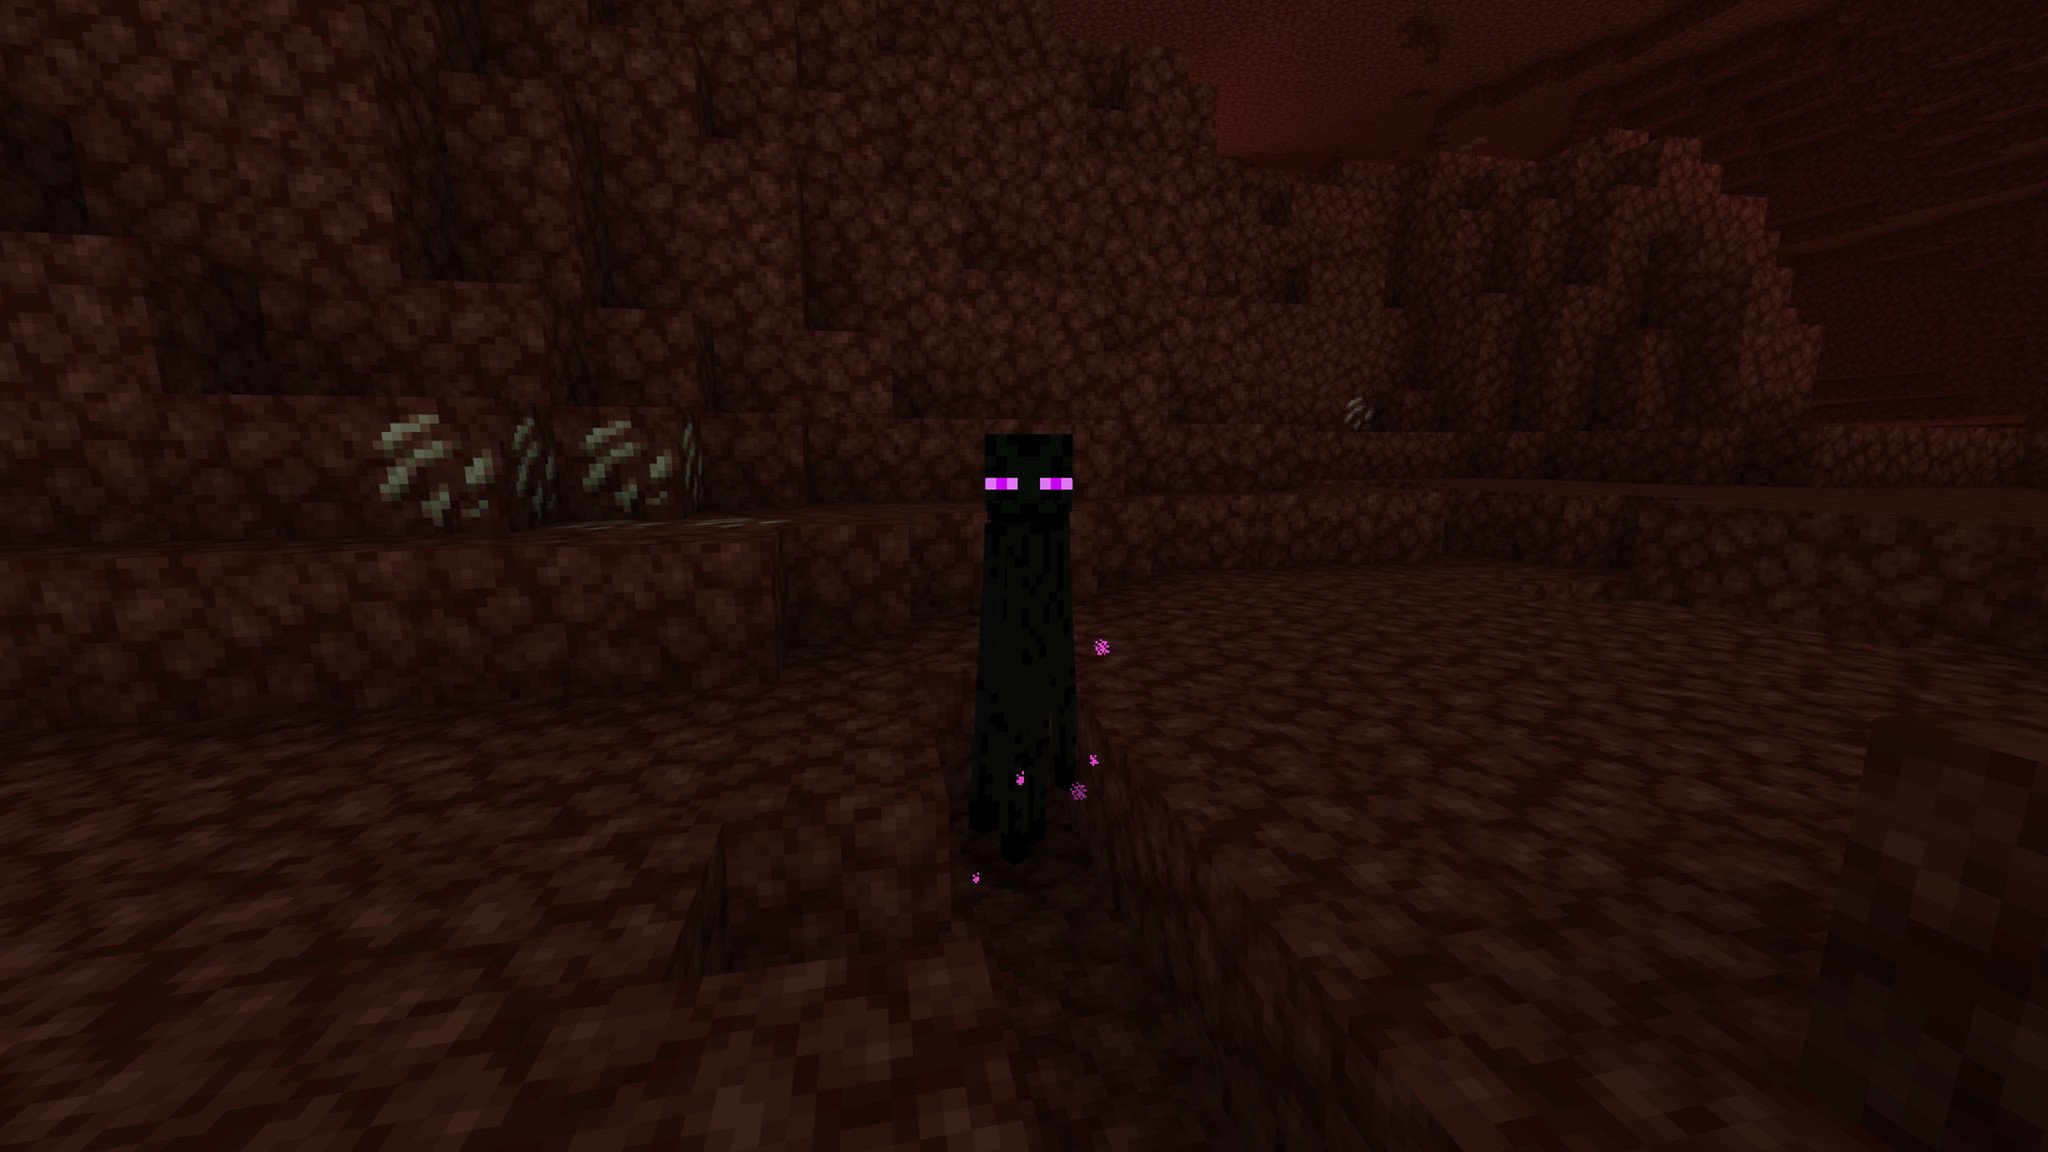 The Nether in Minecraft